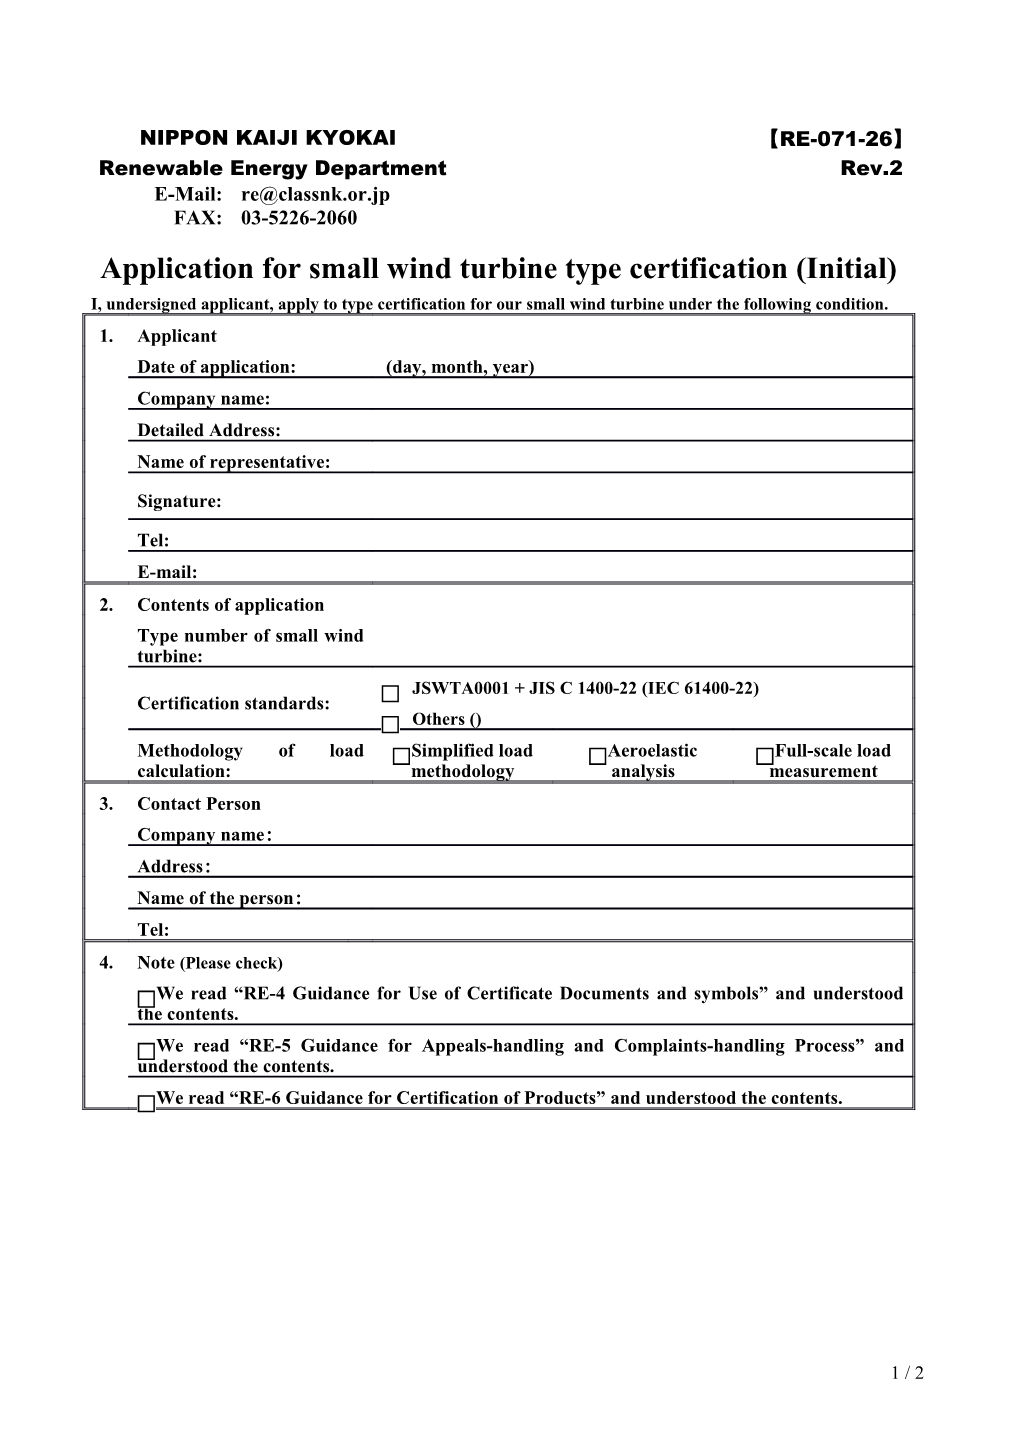 Application for Small Wind Turbinetype Certification (Initial)